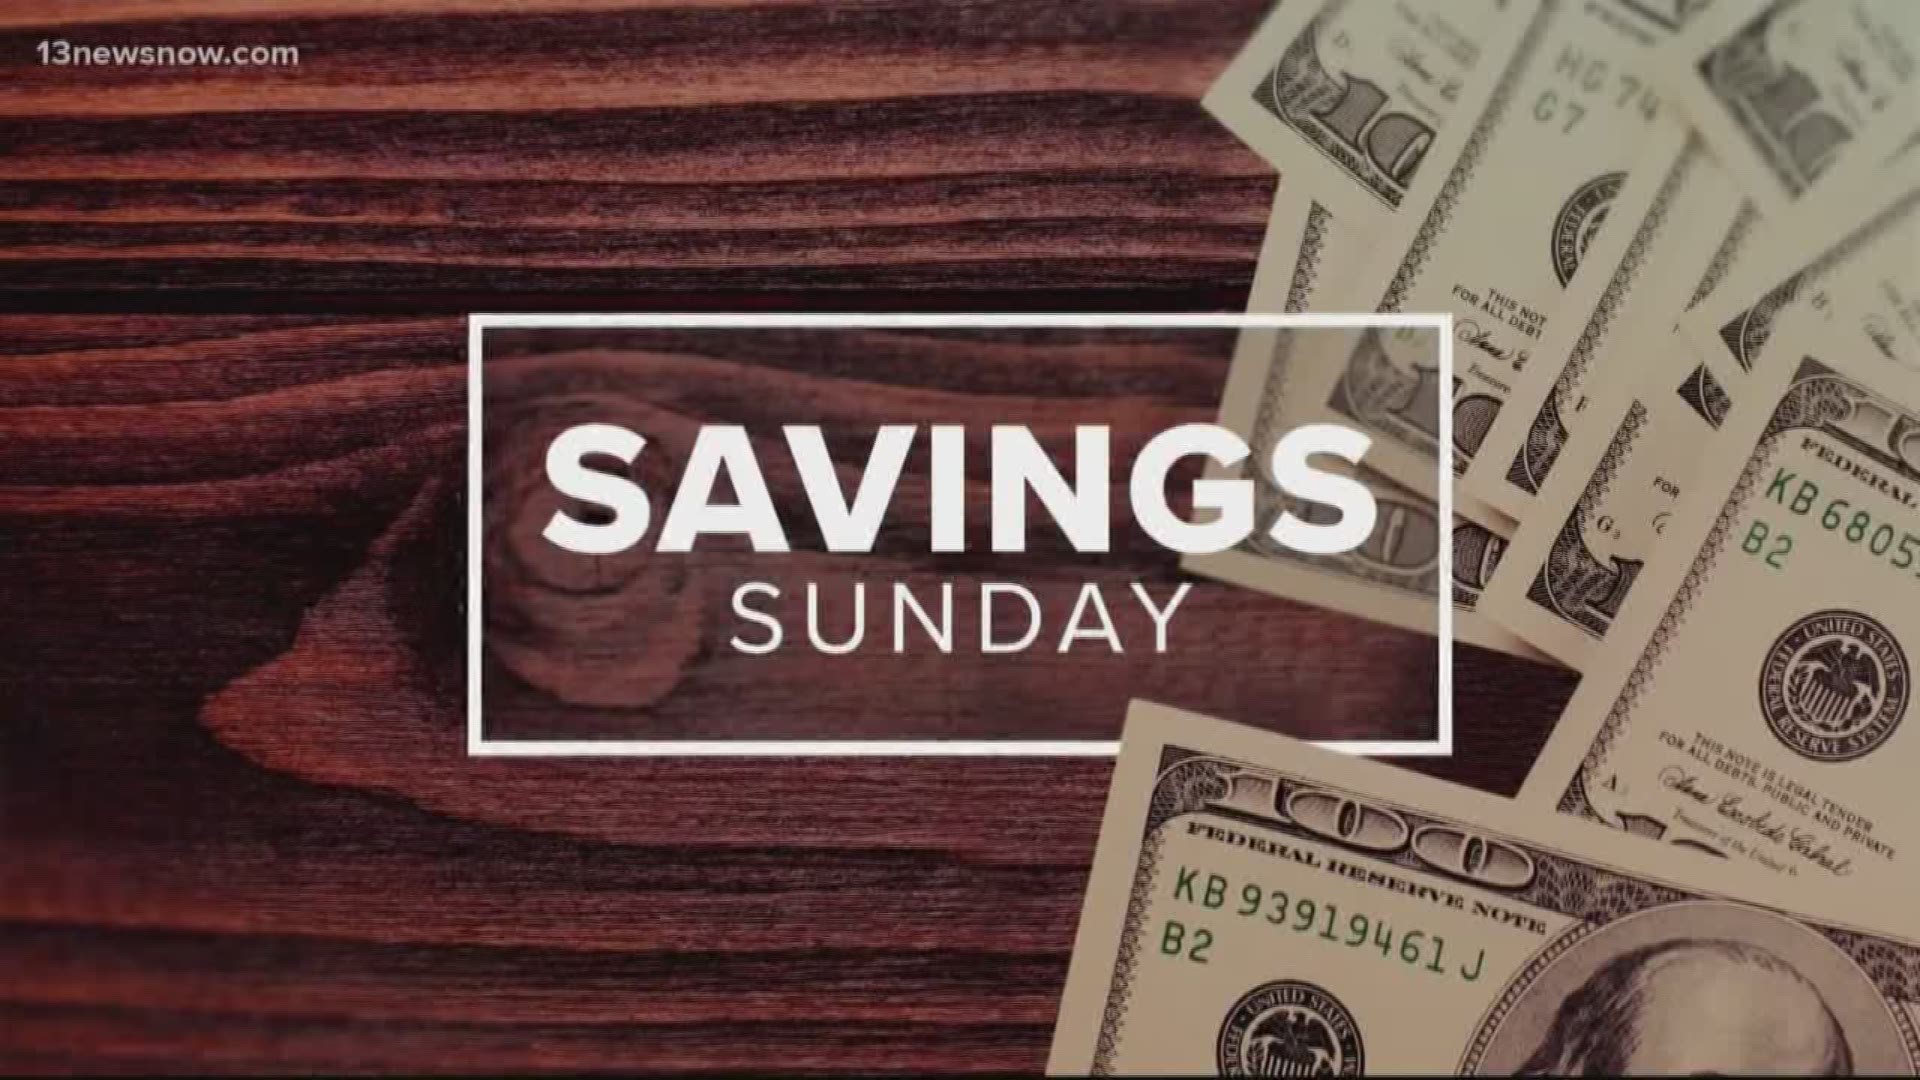 Laura Oliver from www.afrugalchick.com has your big savings for the week of April 14, 2019.